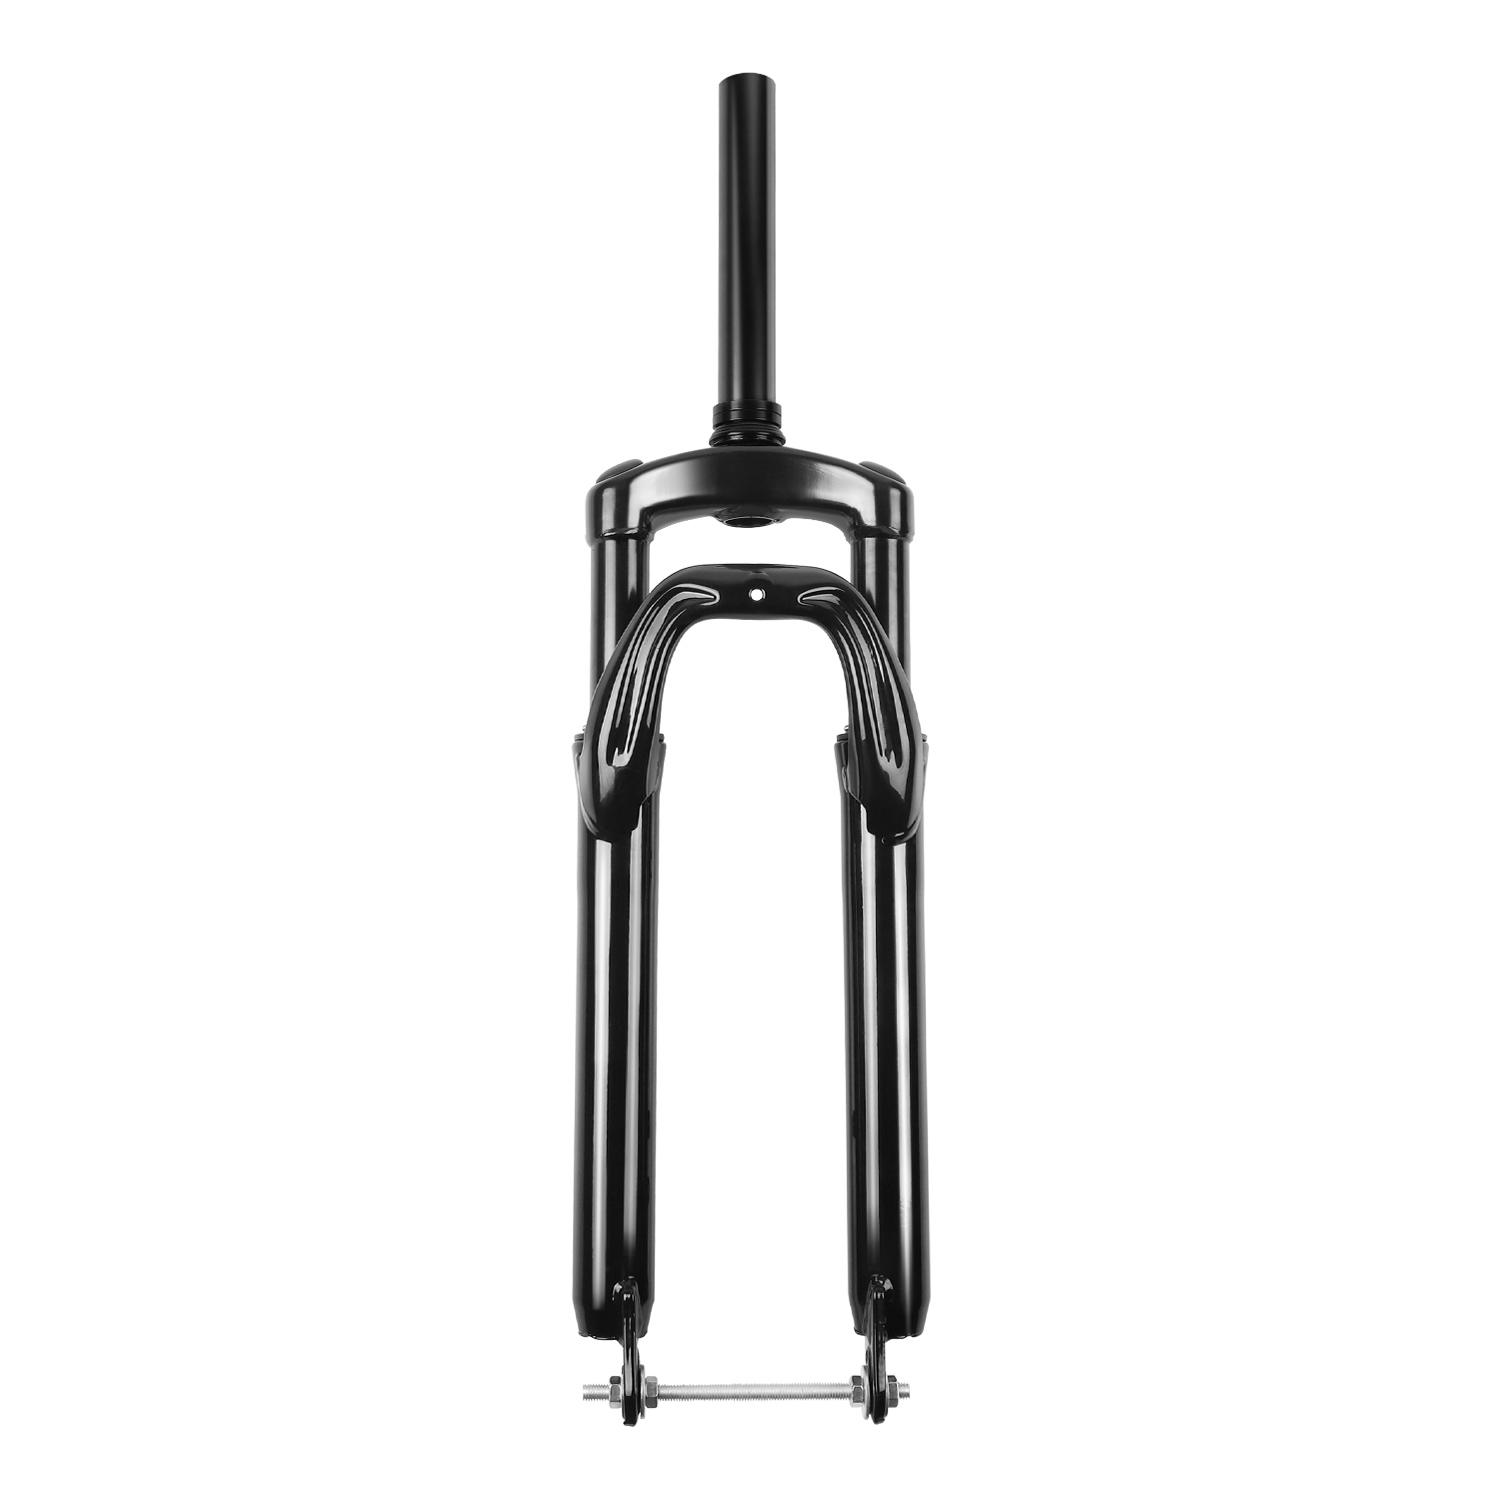 INTHEAIR 07 Model Ebike Fork and Quick Release